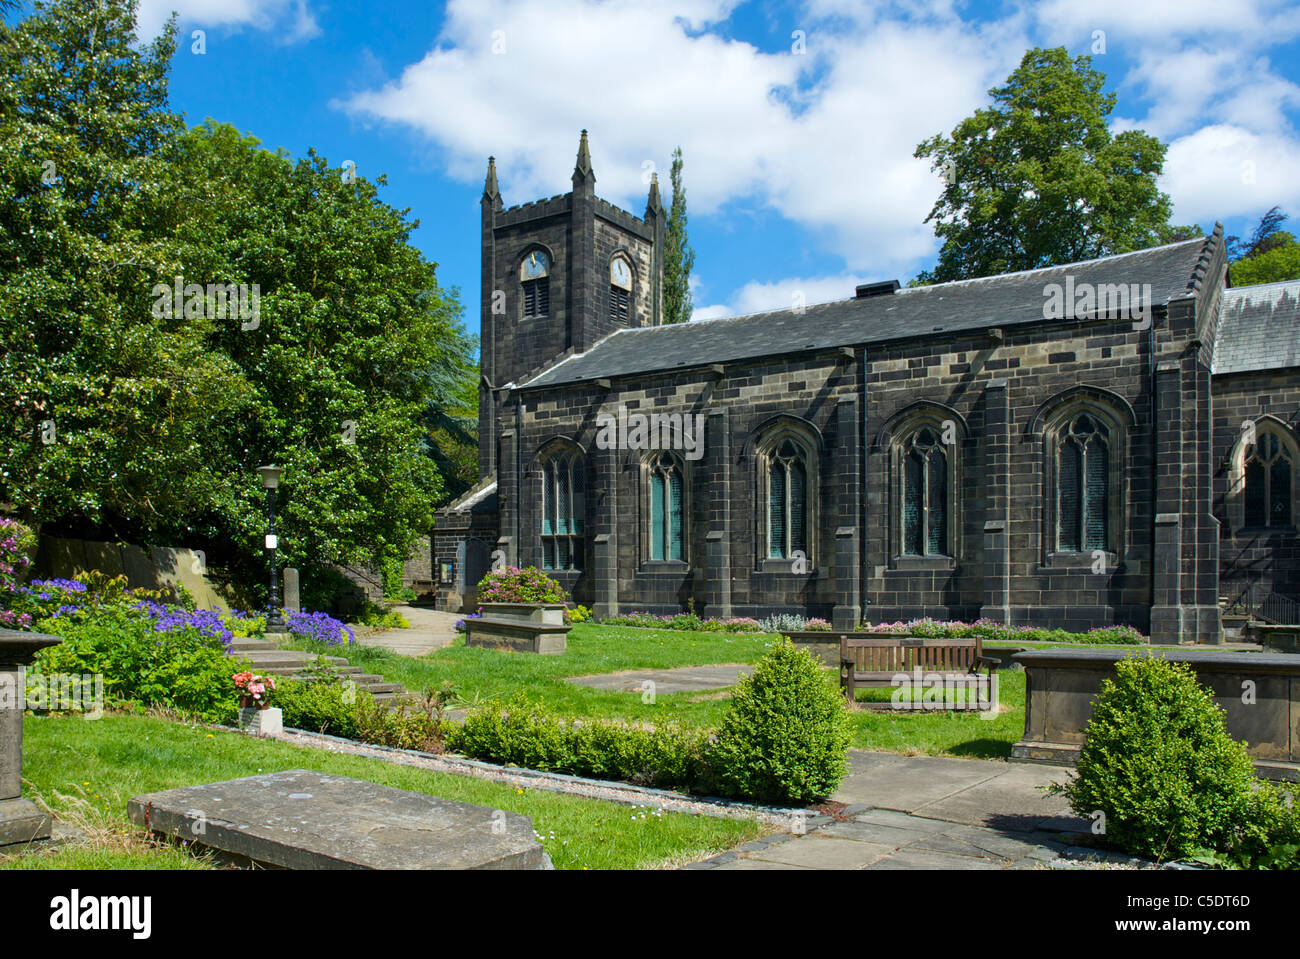 St Mary's Church in the village of Luddenden, near Halifax, Calderdale, West Yorkshire, England UK Stock Photo